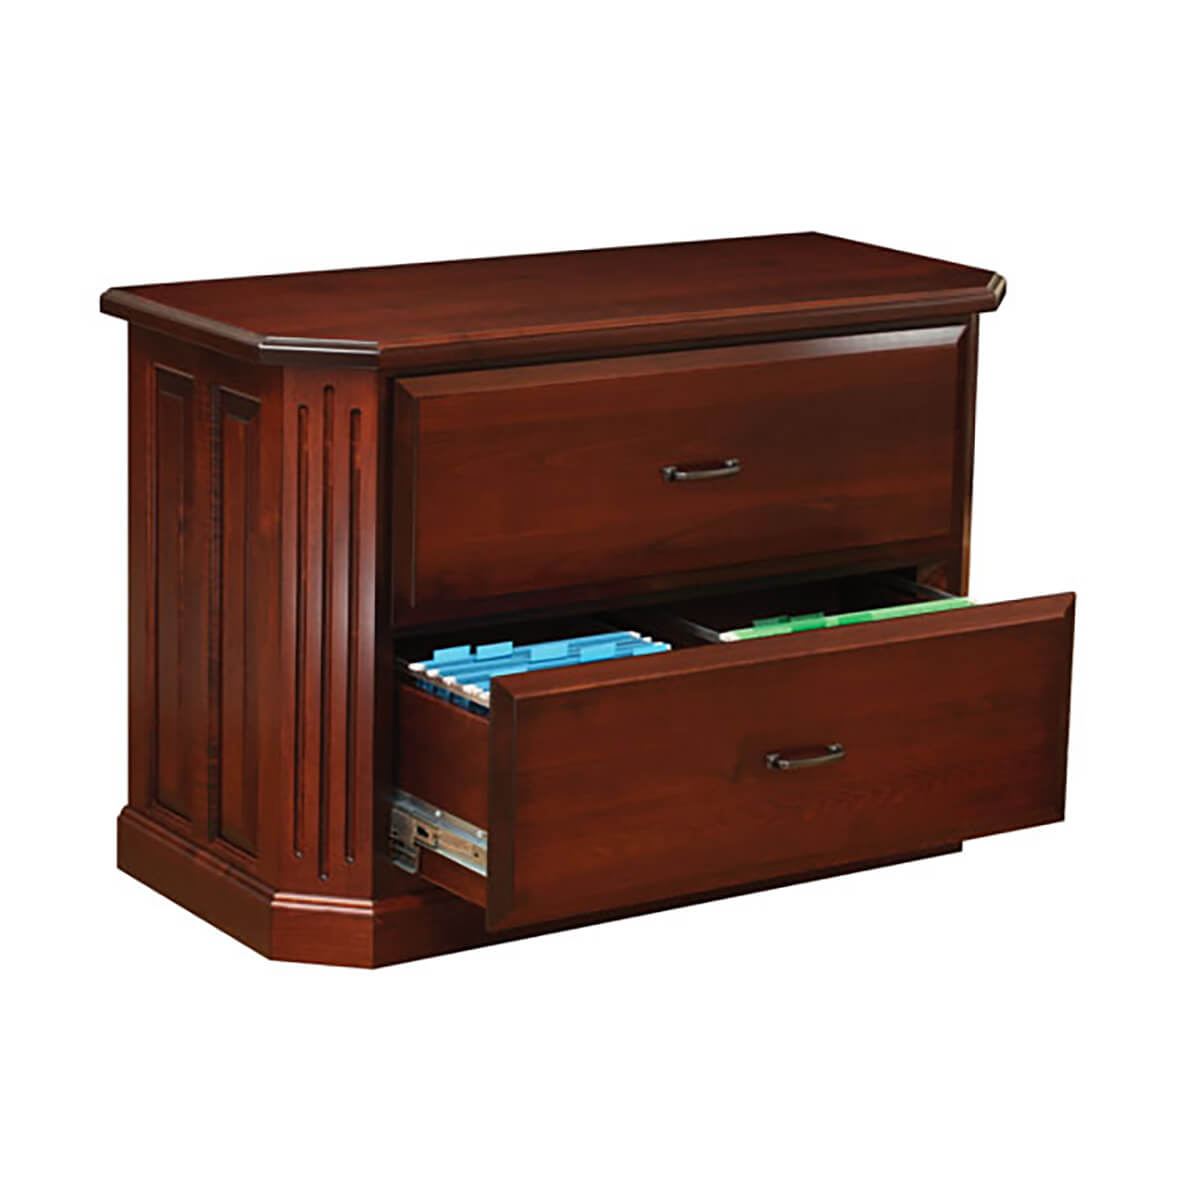 Solid wood fifth avenue two drawer lateral file cabinet